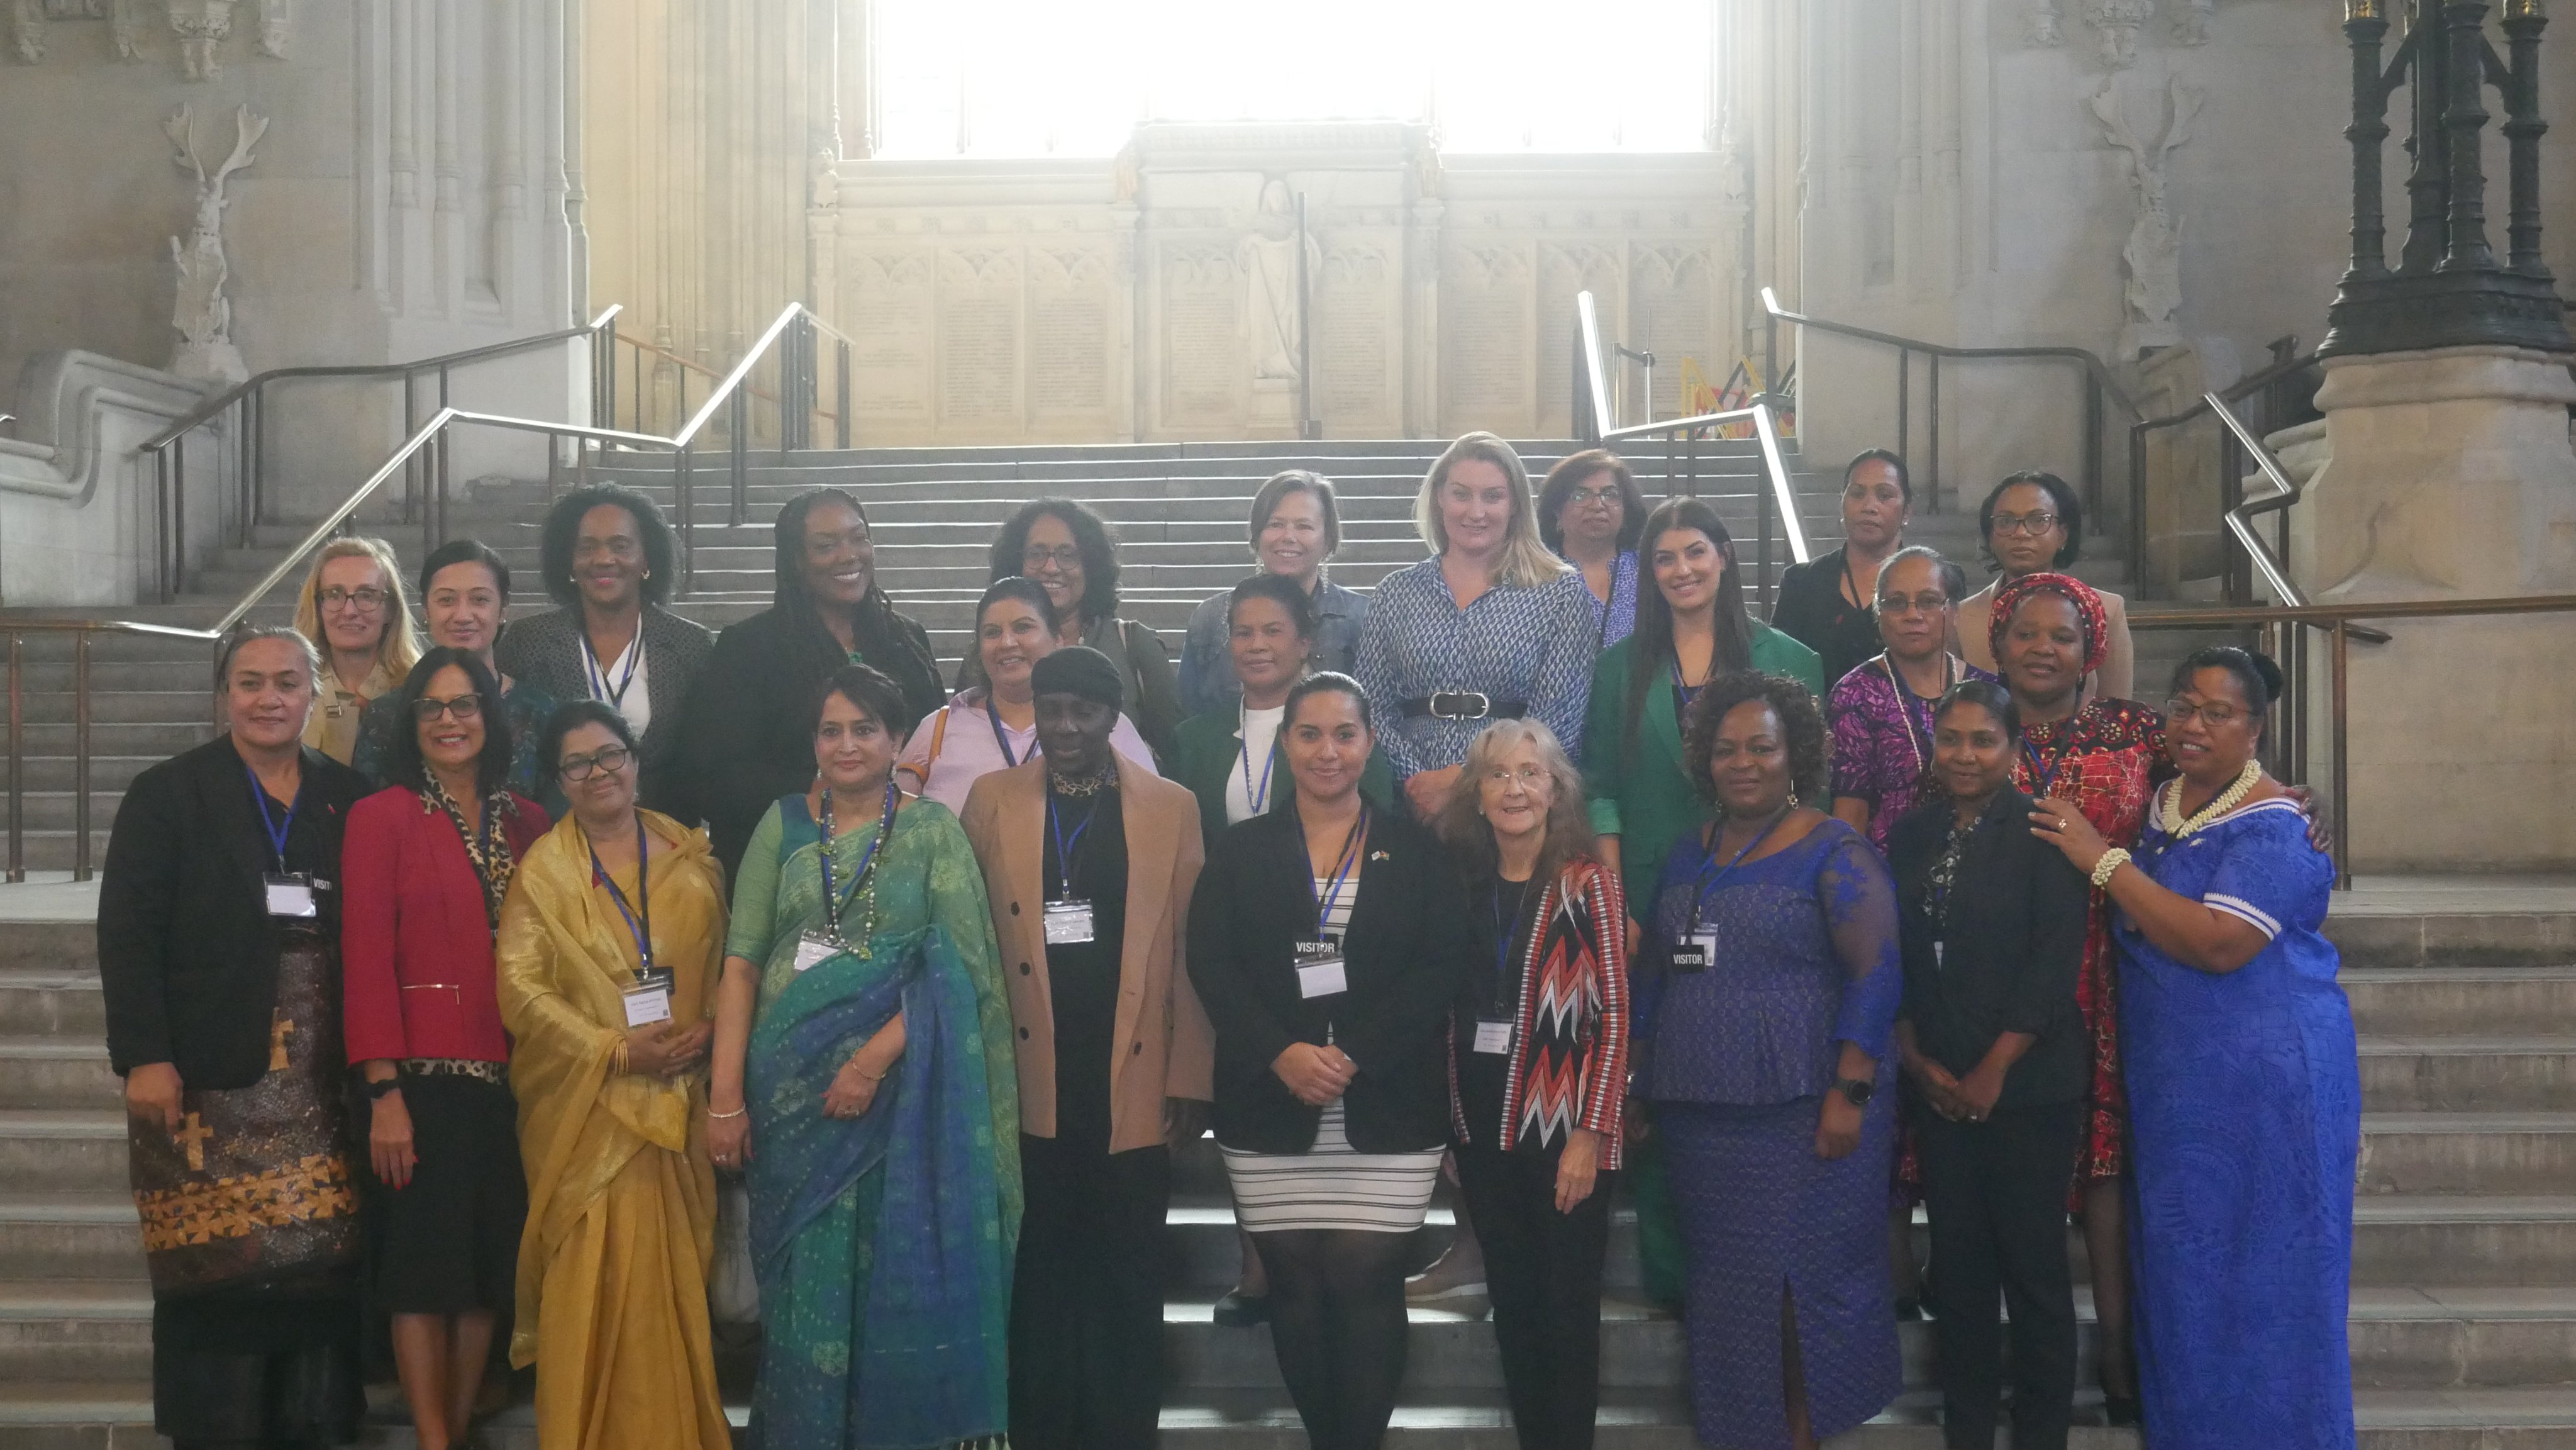 The delegates in Westminster Hall